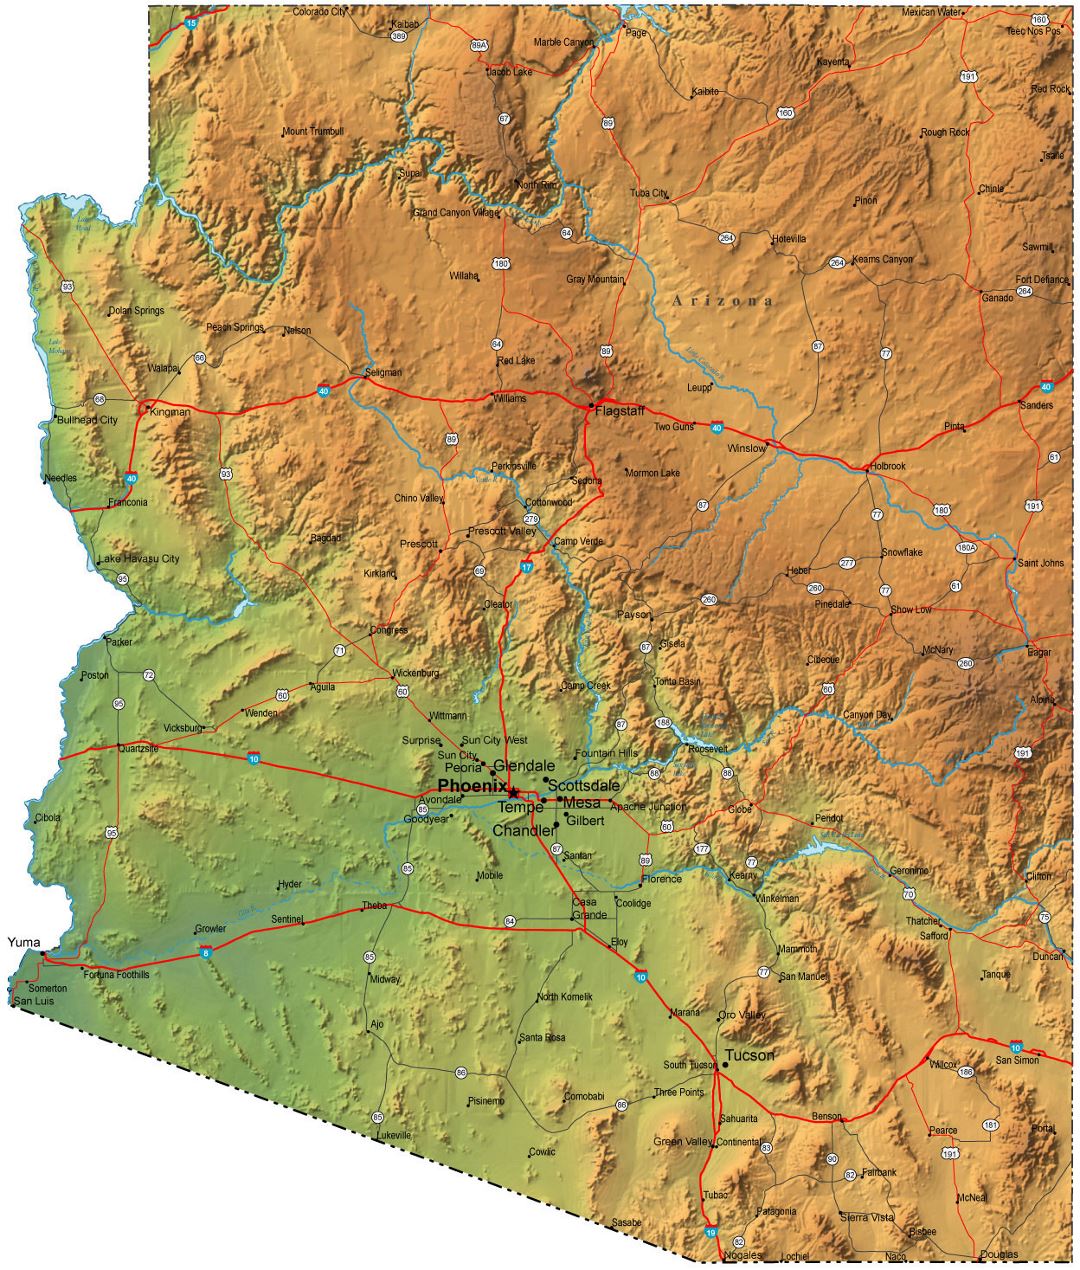 Detailed elevation map of Arizona state with roads and cities